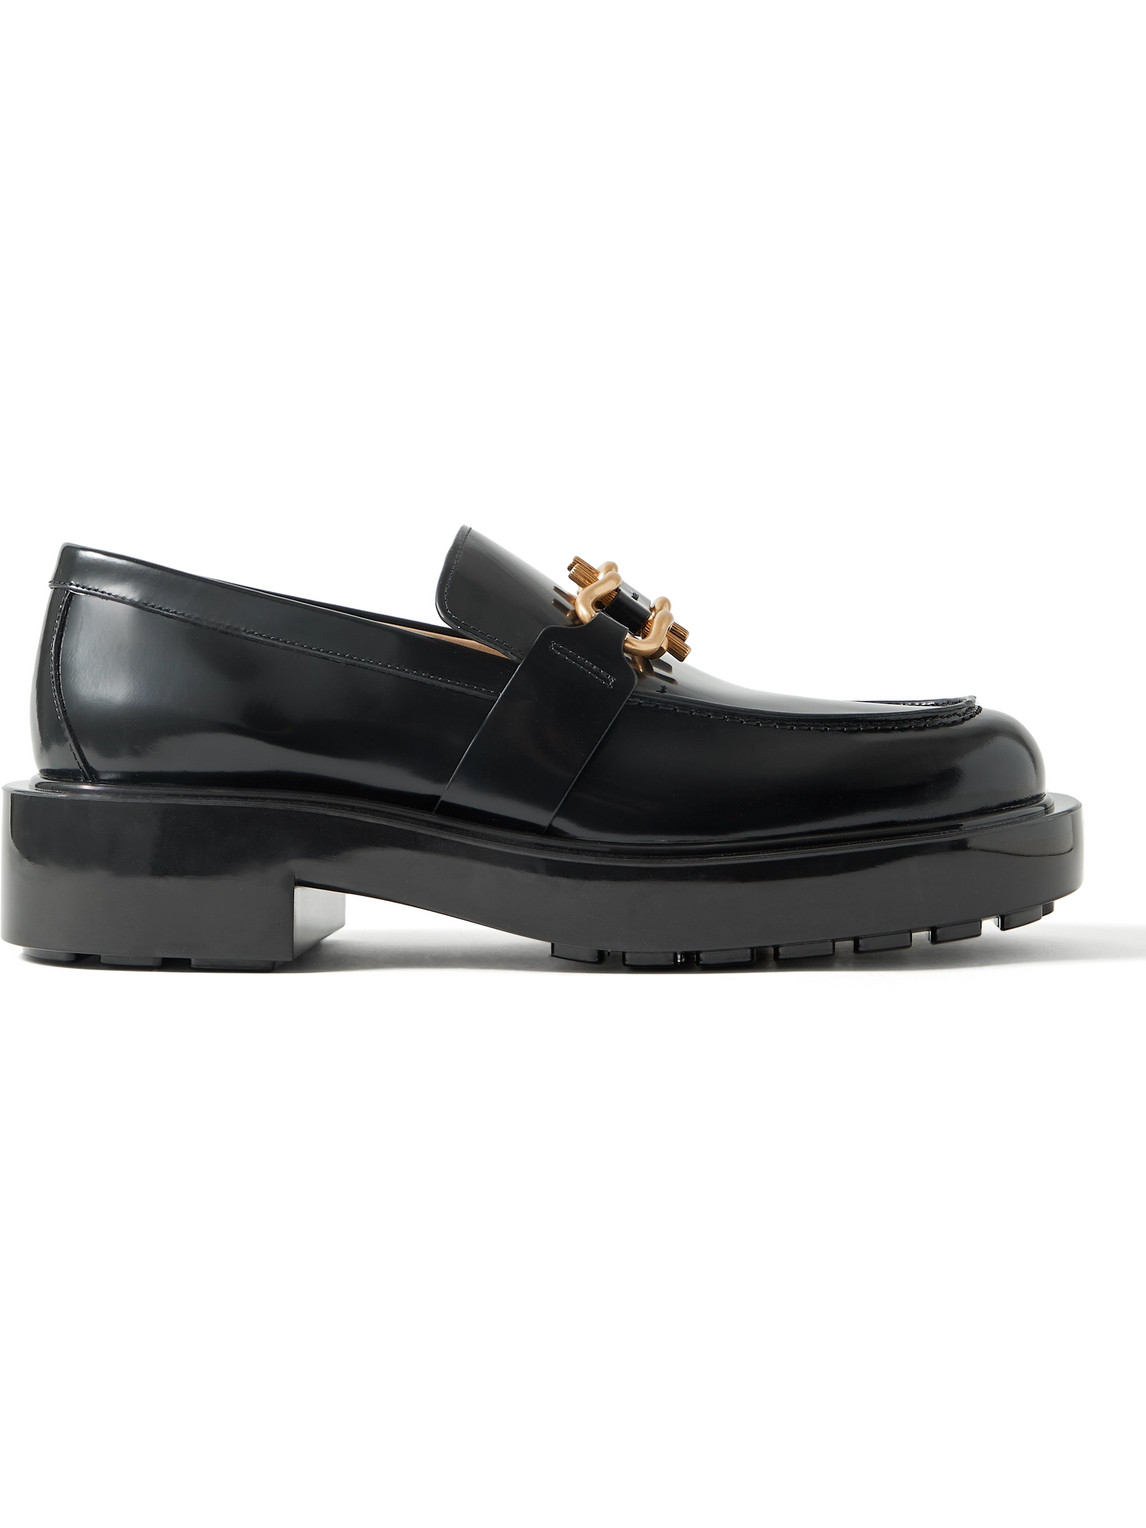 Horsebit Glossed-Leather Loafers